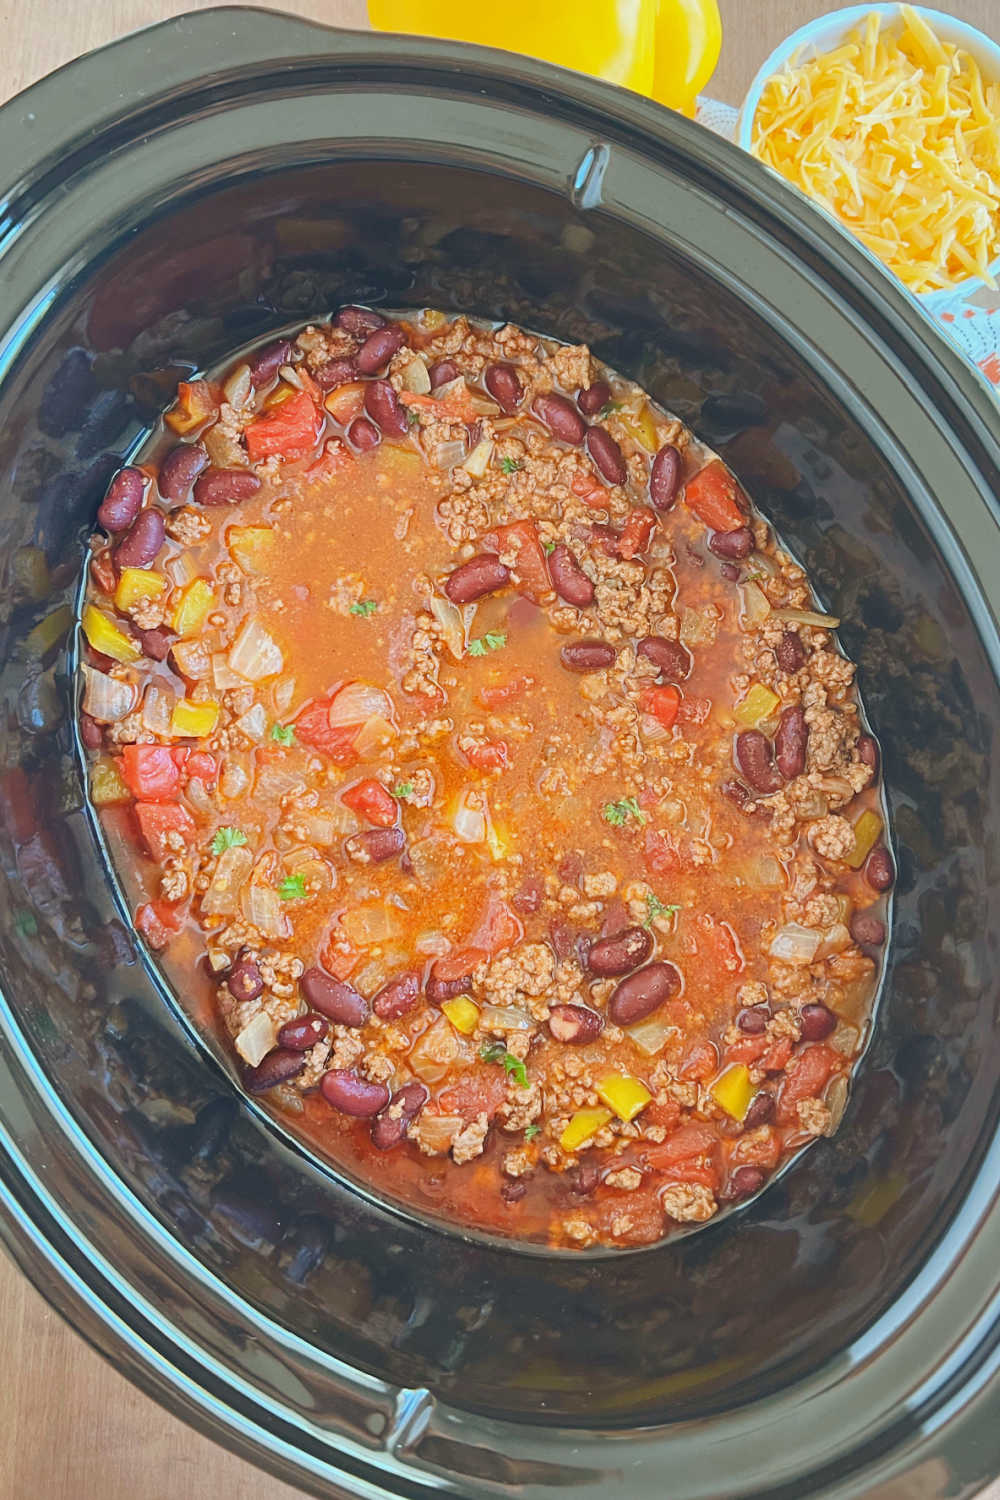 mild chili with ground beef in crockpot slow cooker